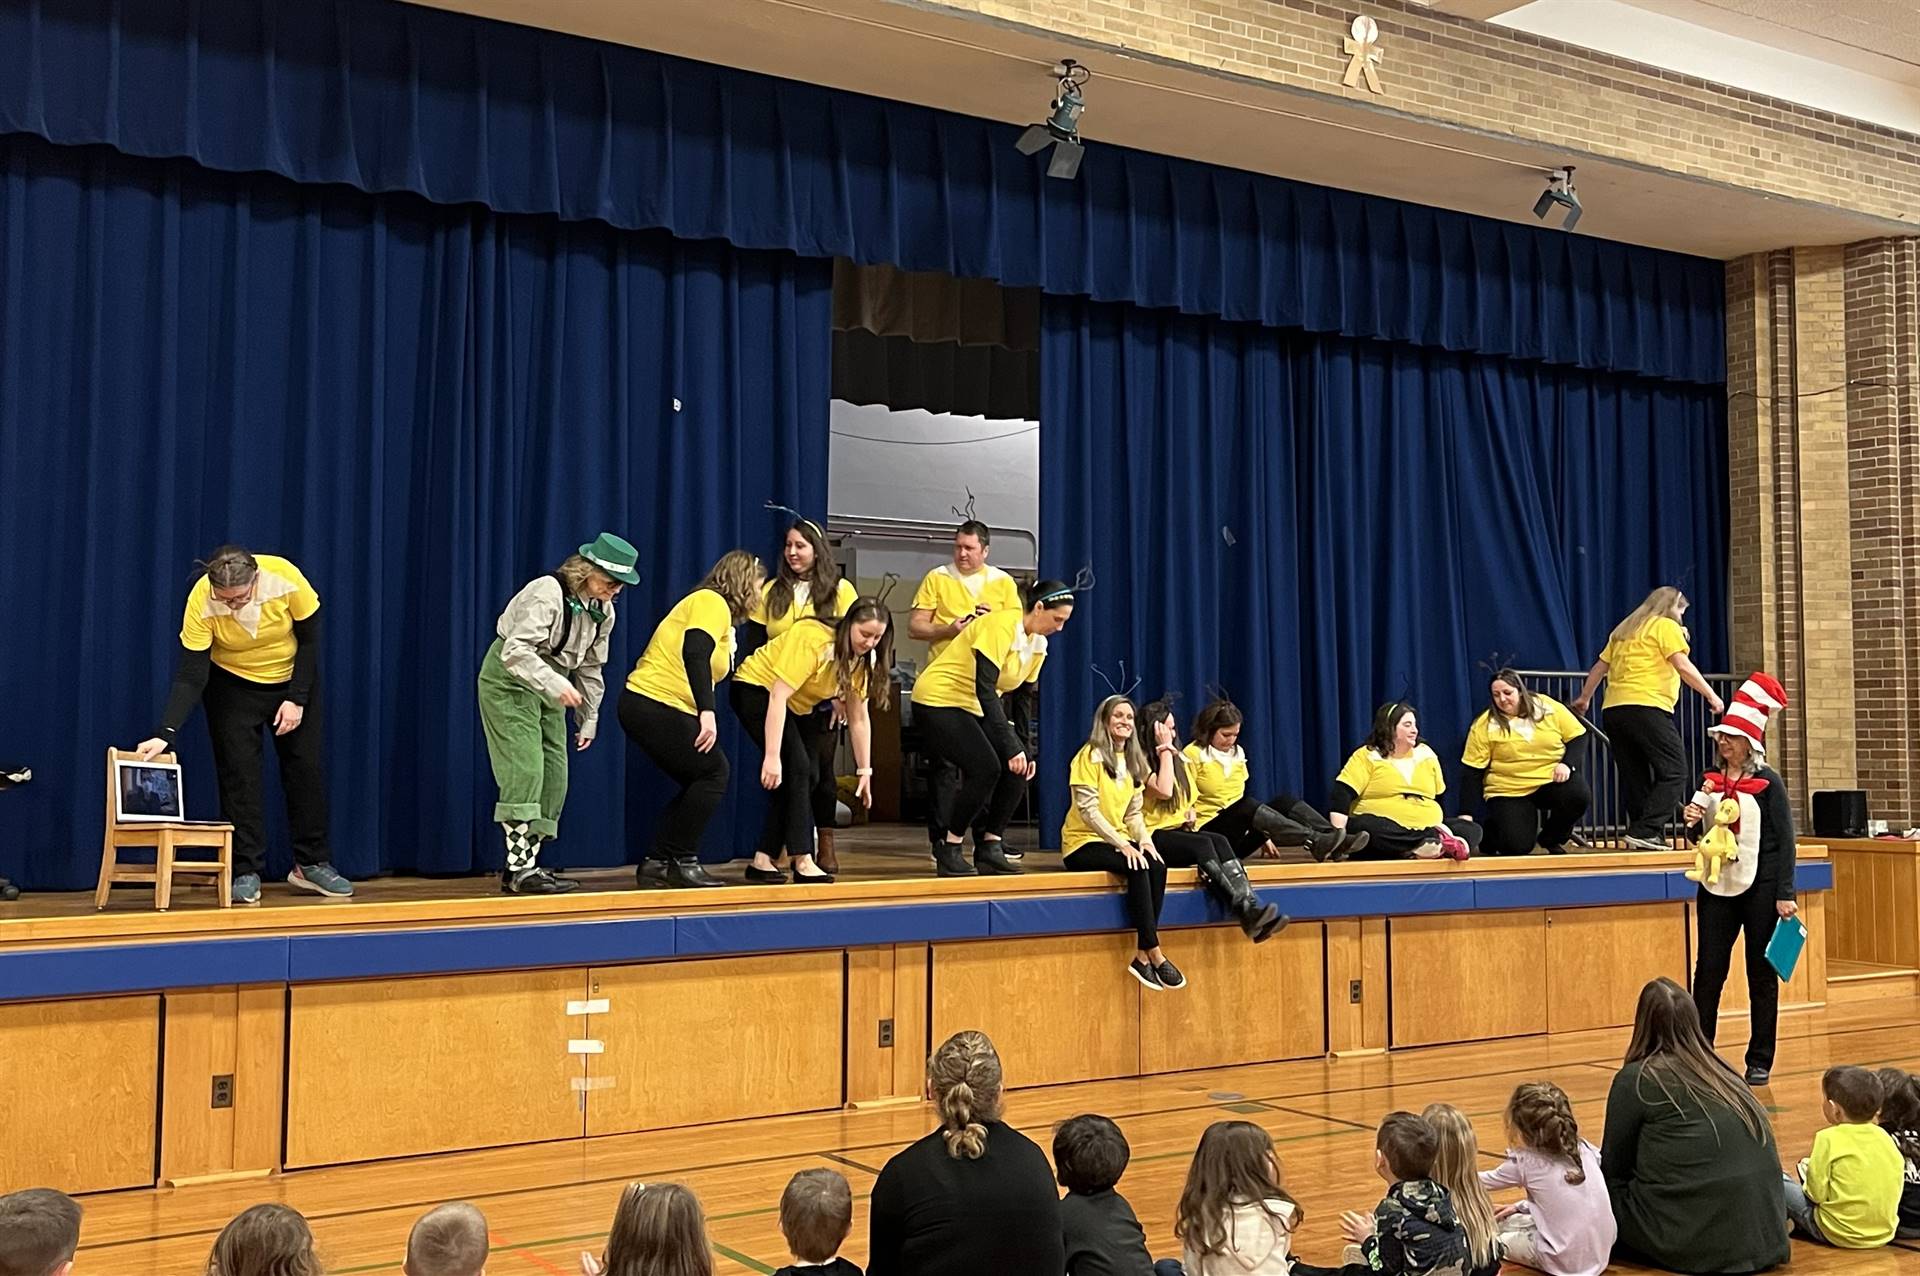 The full cast of the sneetches play